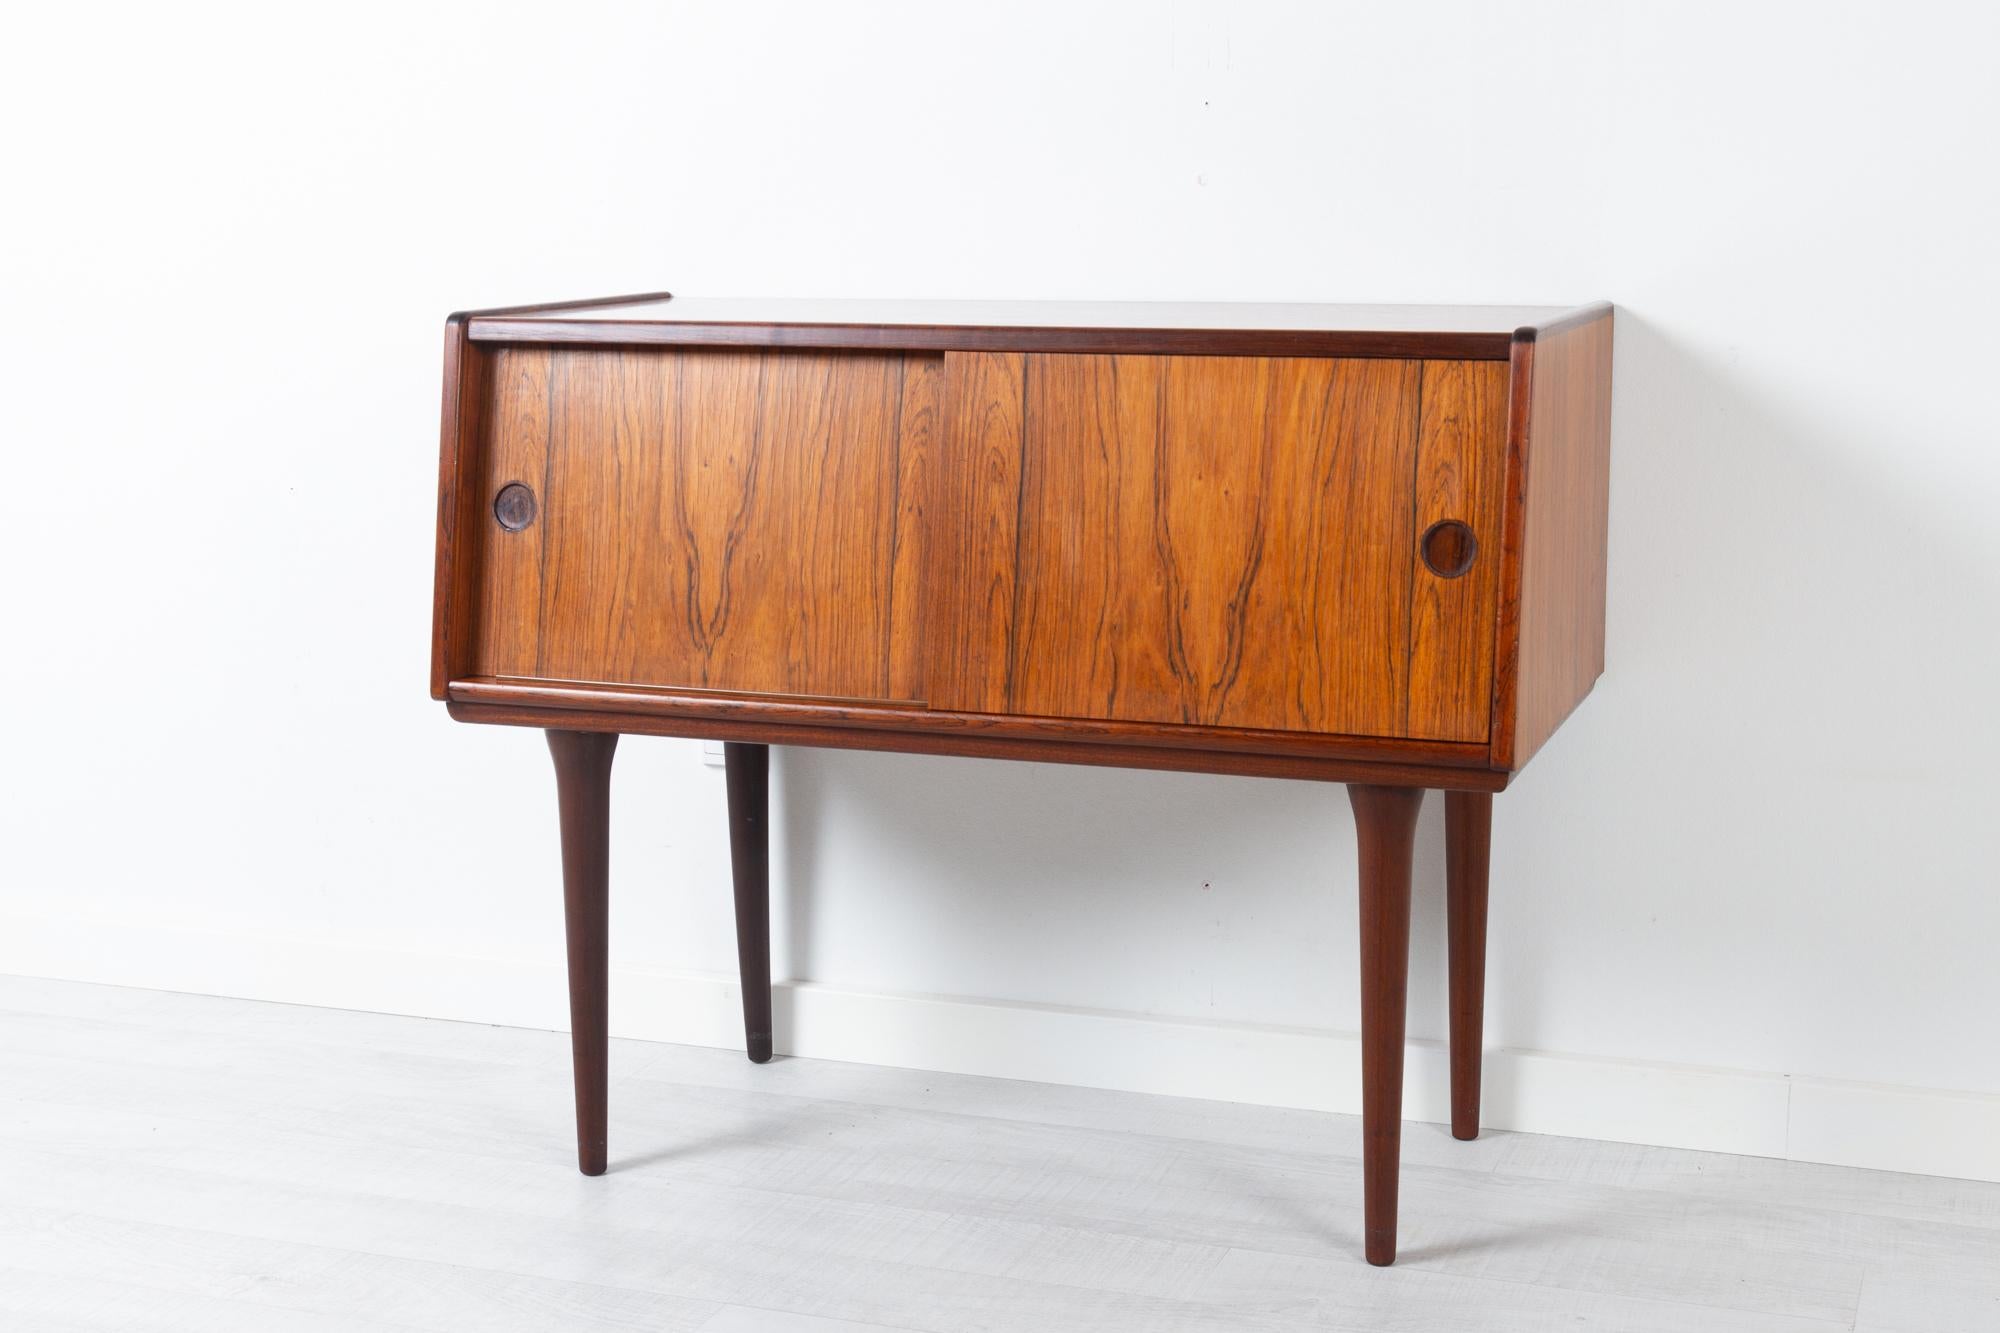 Vintage Danish rosewood sideboard 1960s
Small Danish Mid-Century Modern sideboard with sloping front and double sliding doors. Inside divided into two compartments, one with a fixed shelf.
Cabinet in Rosewood veneer. Tall round tapered legs in